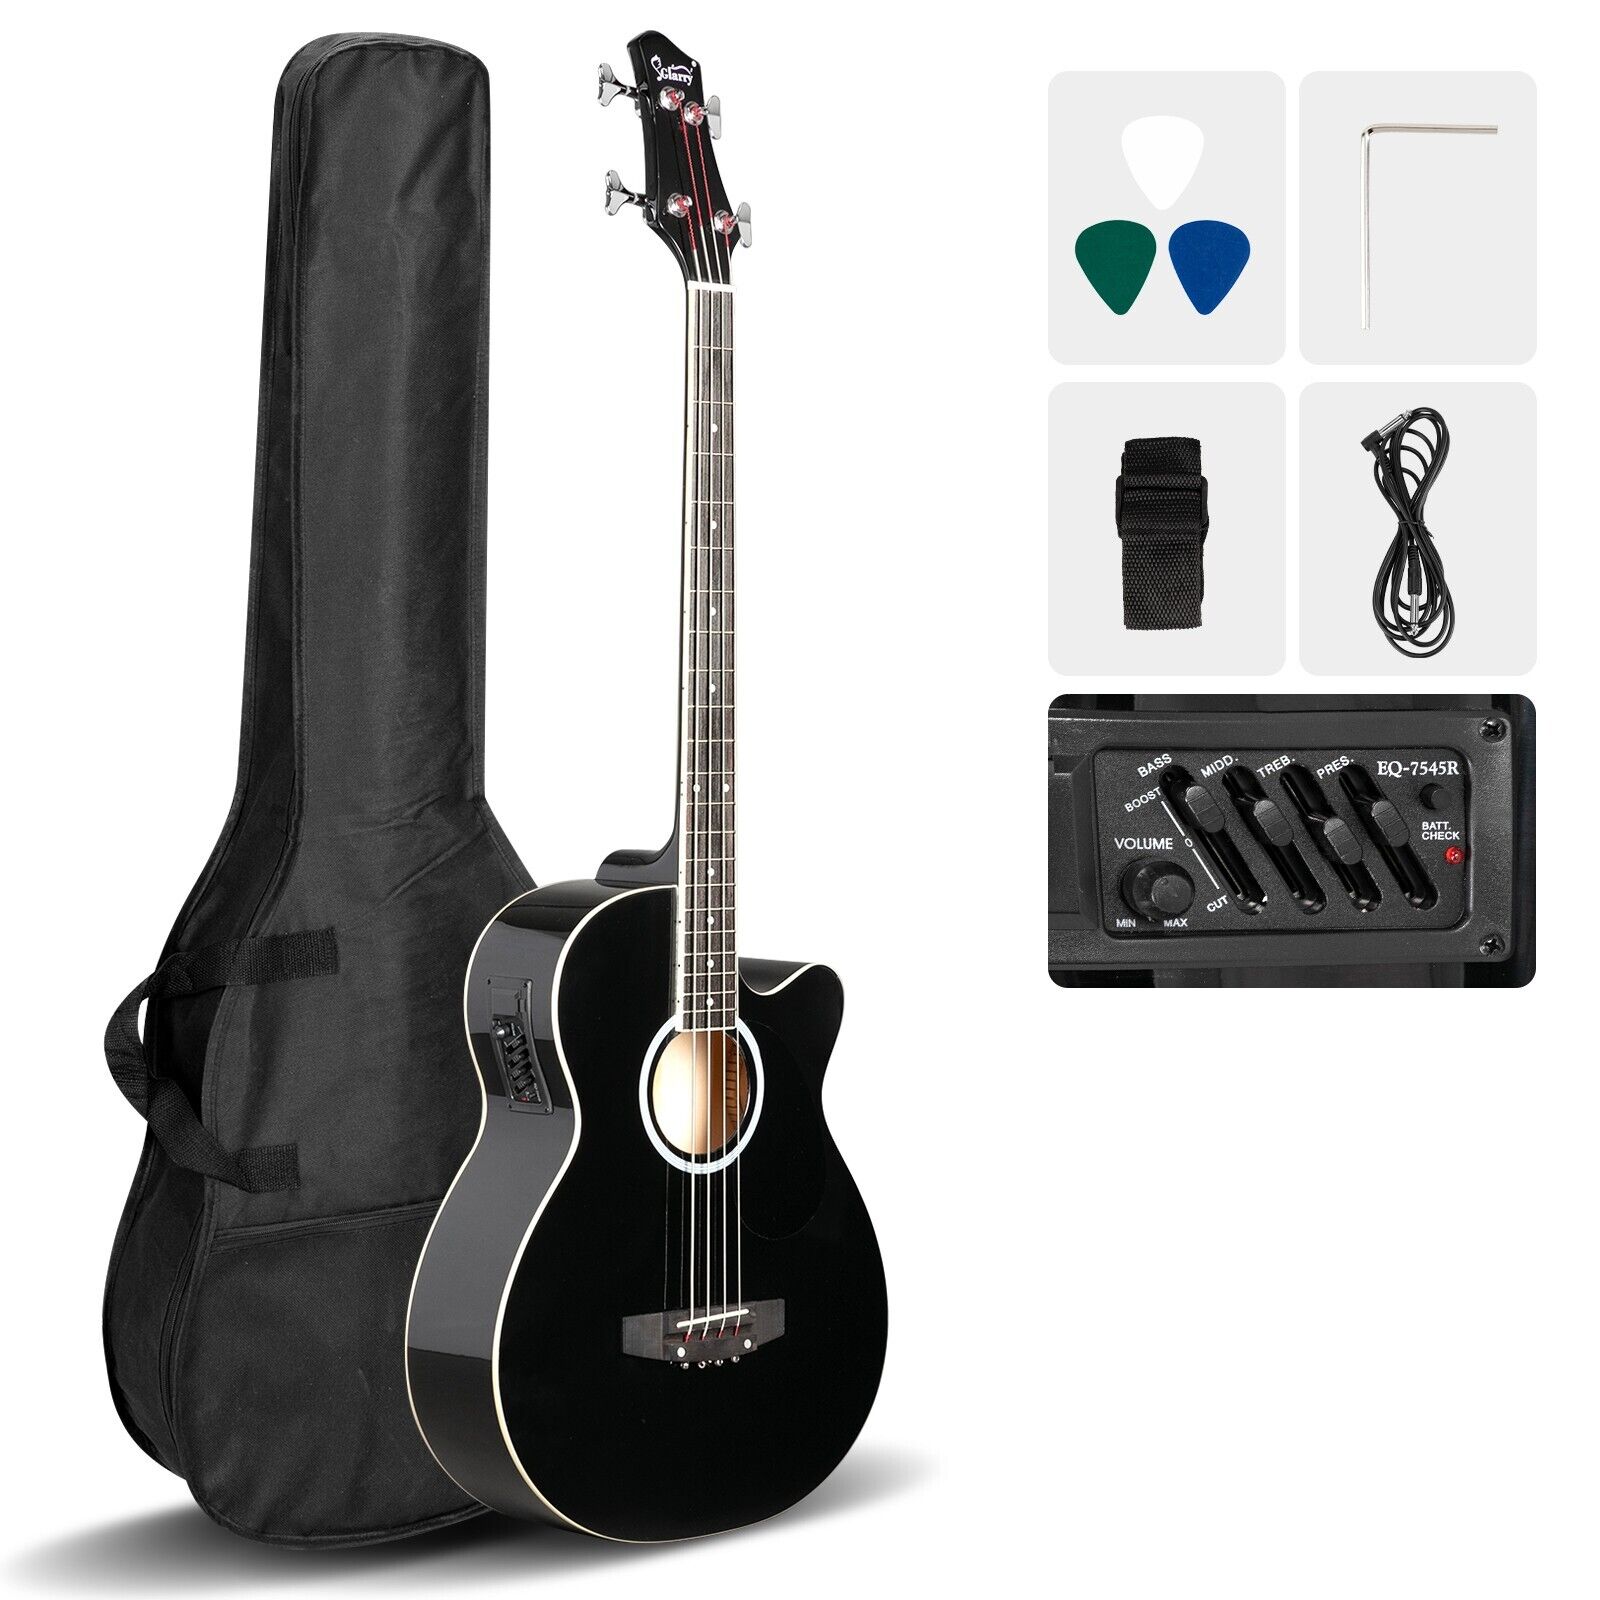 Glarry GMB101 Black 4 string Electric Acoustic Bass Guitar w/ 4-Band Equalizer 1